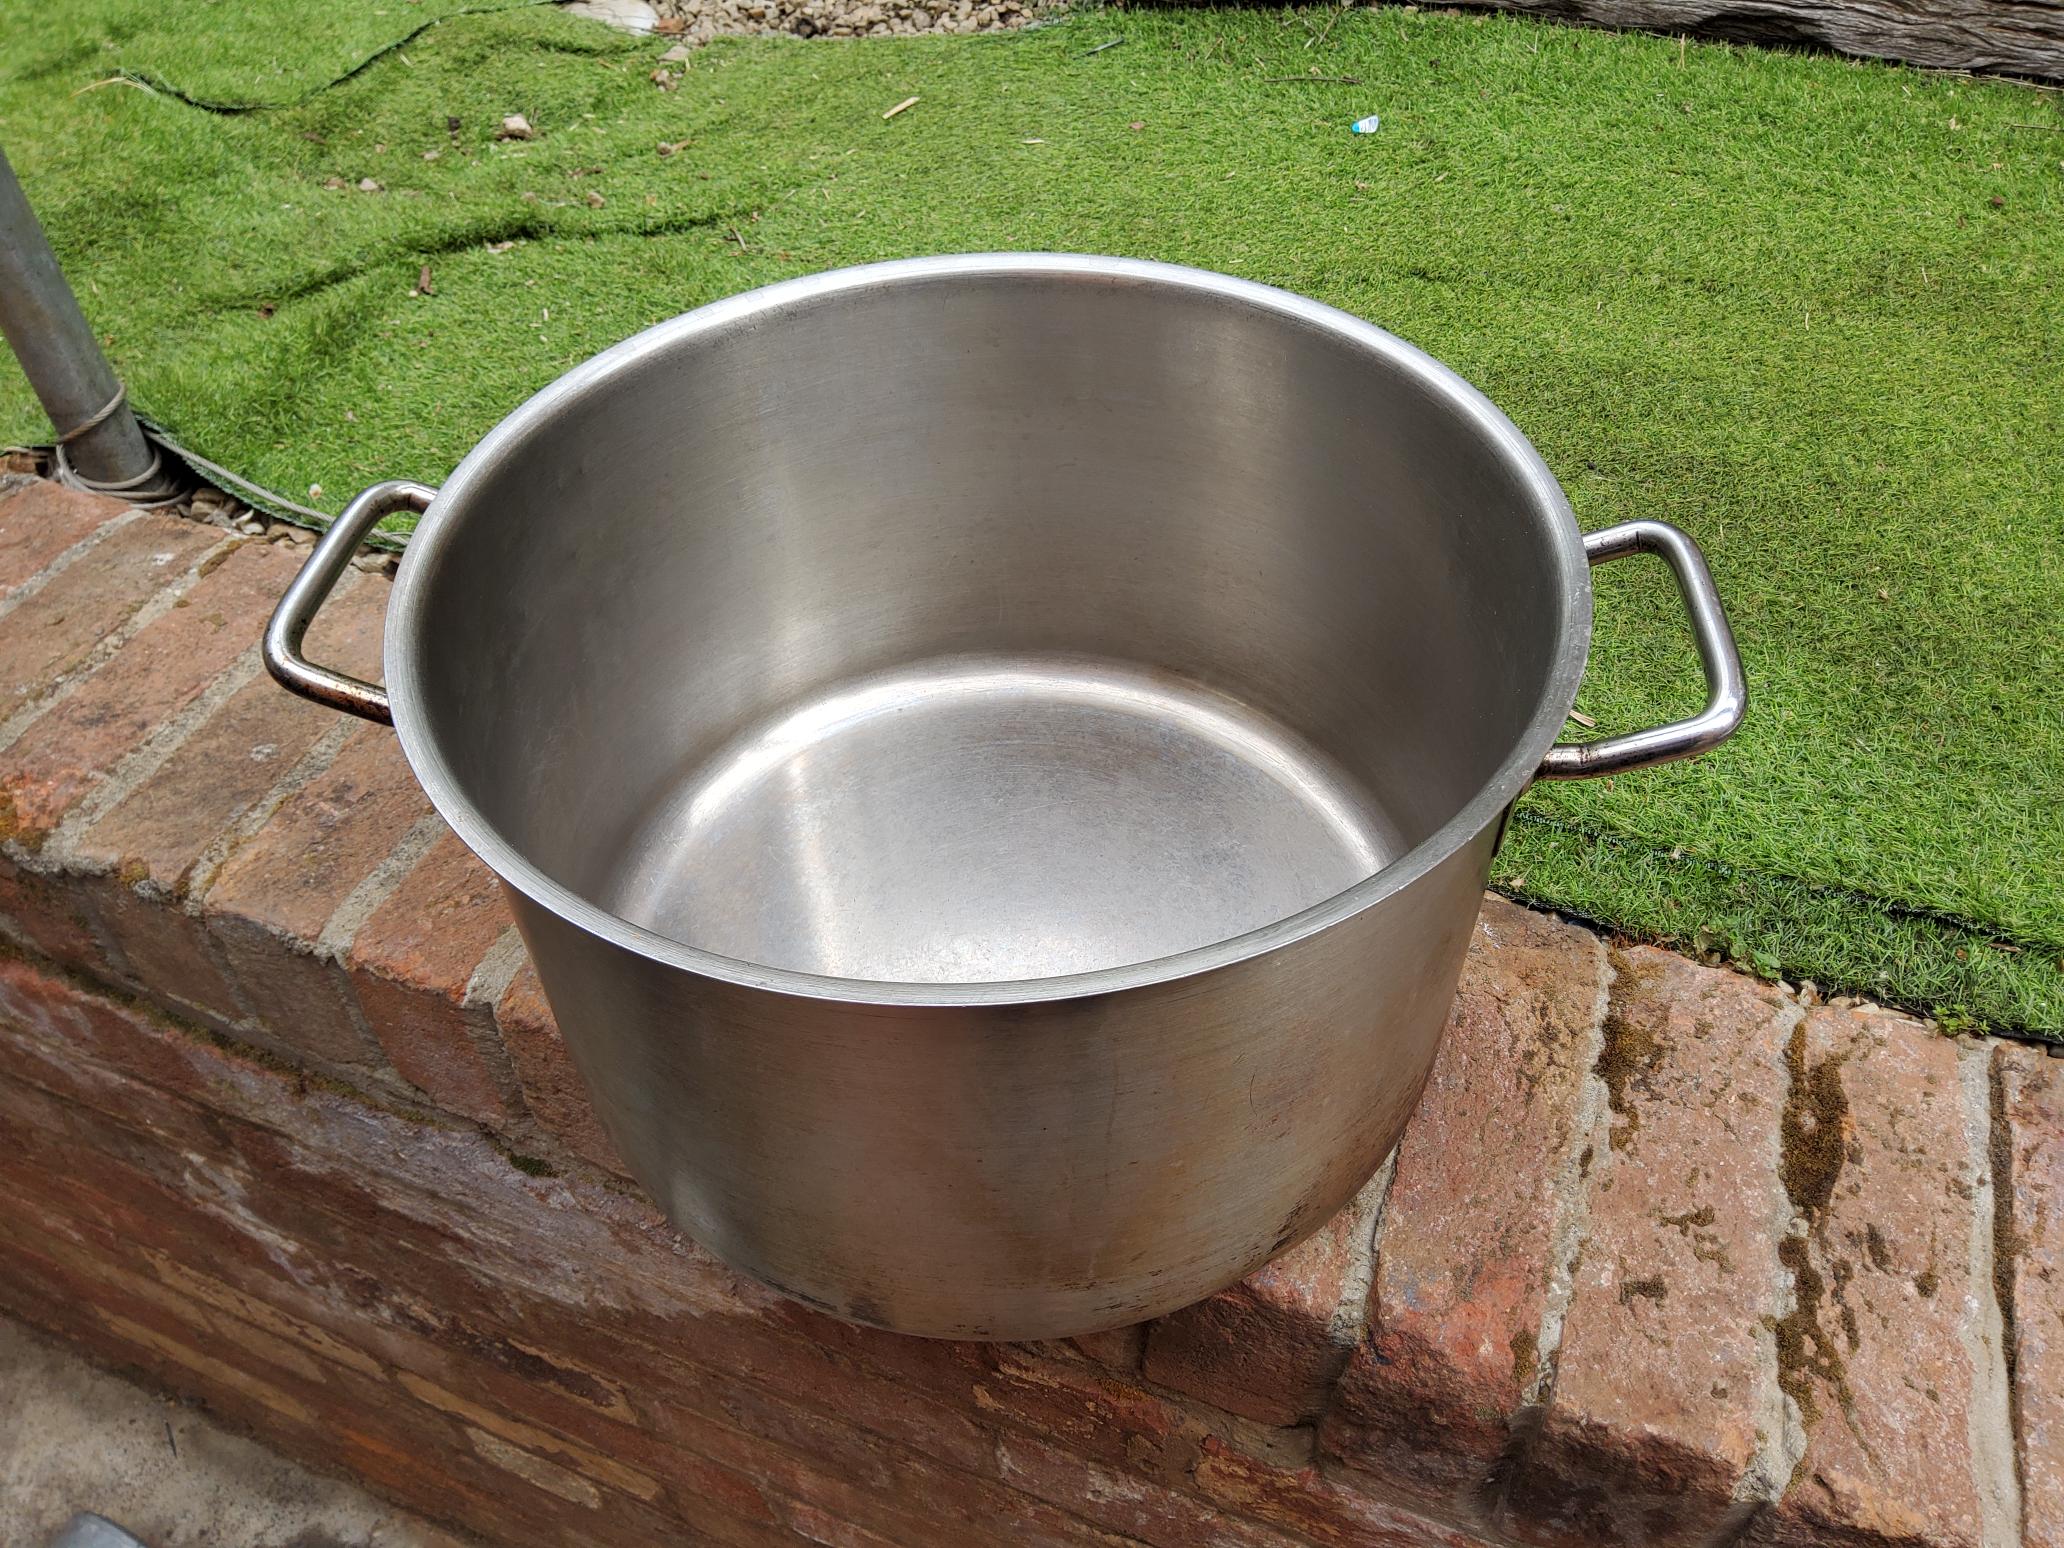 A large empty cooking pot situated outdoors.